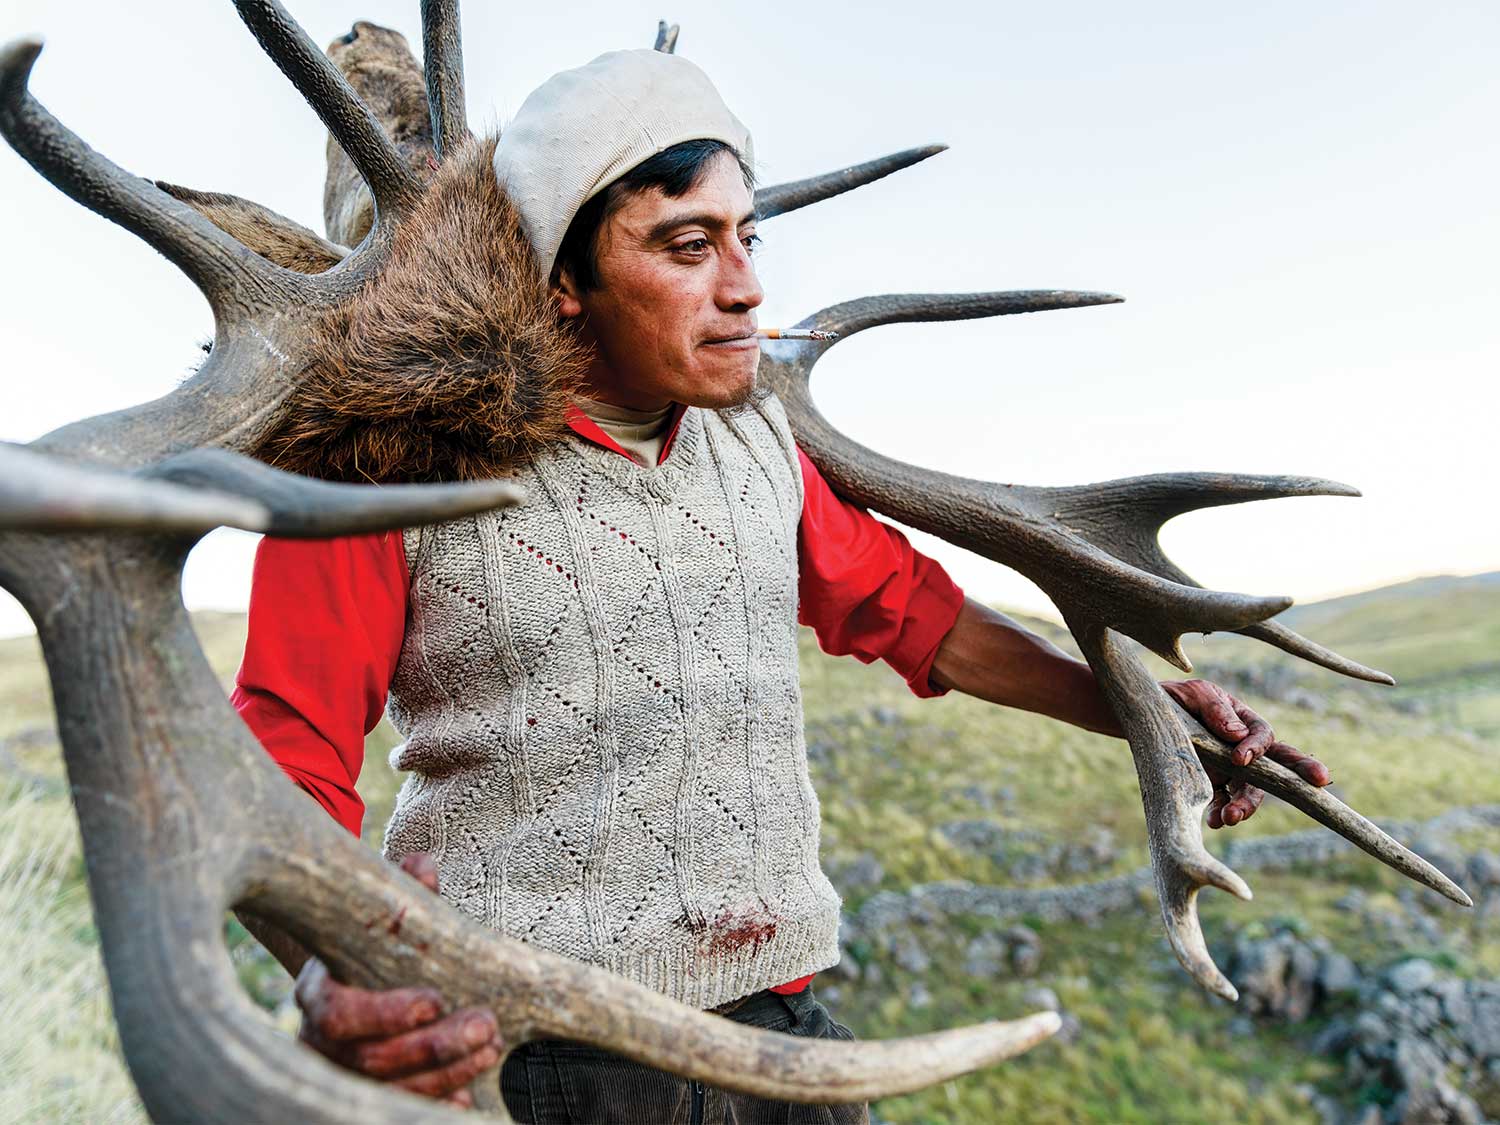 pascual yancanqueo holding giant stag antlers over his shoulders